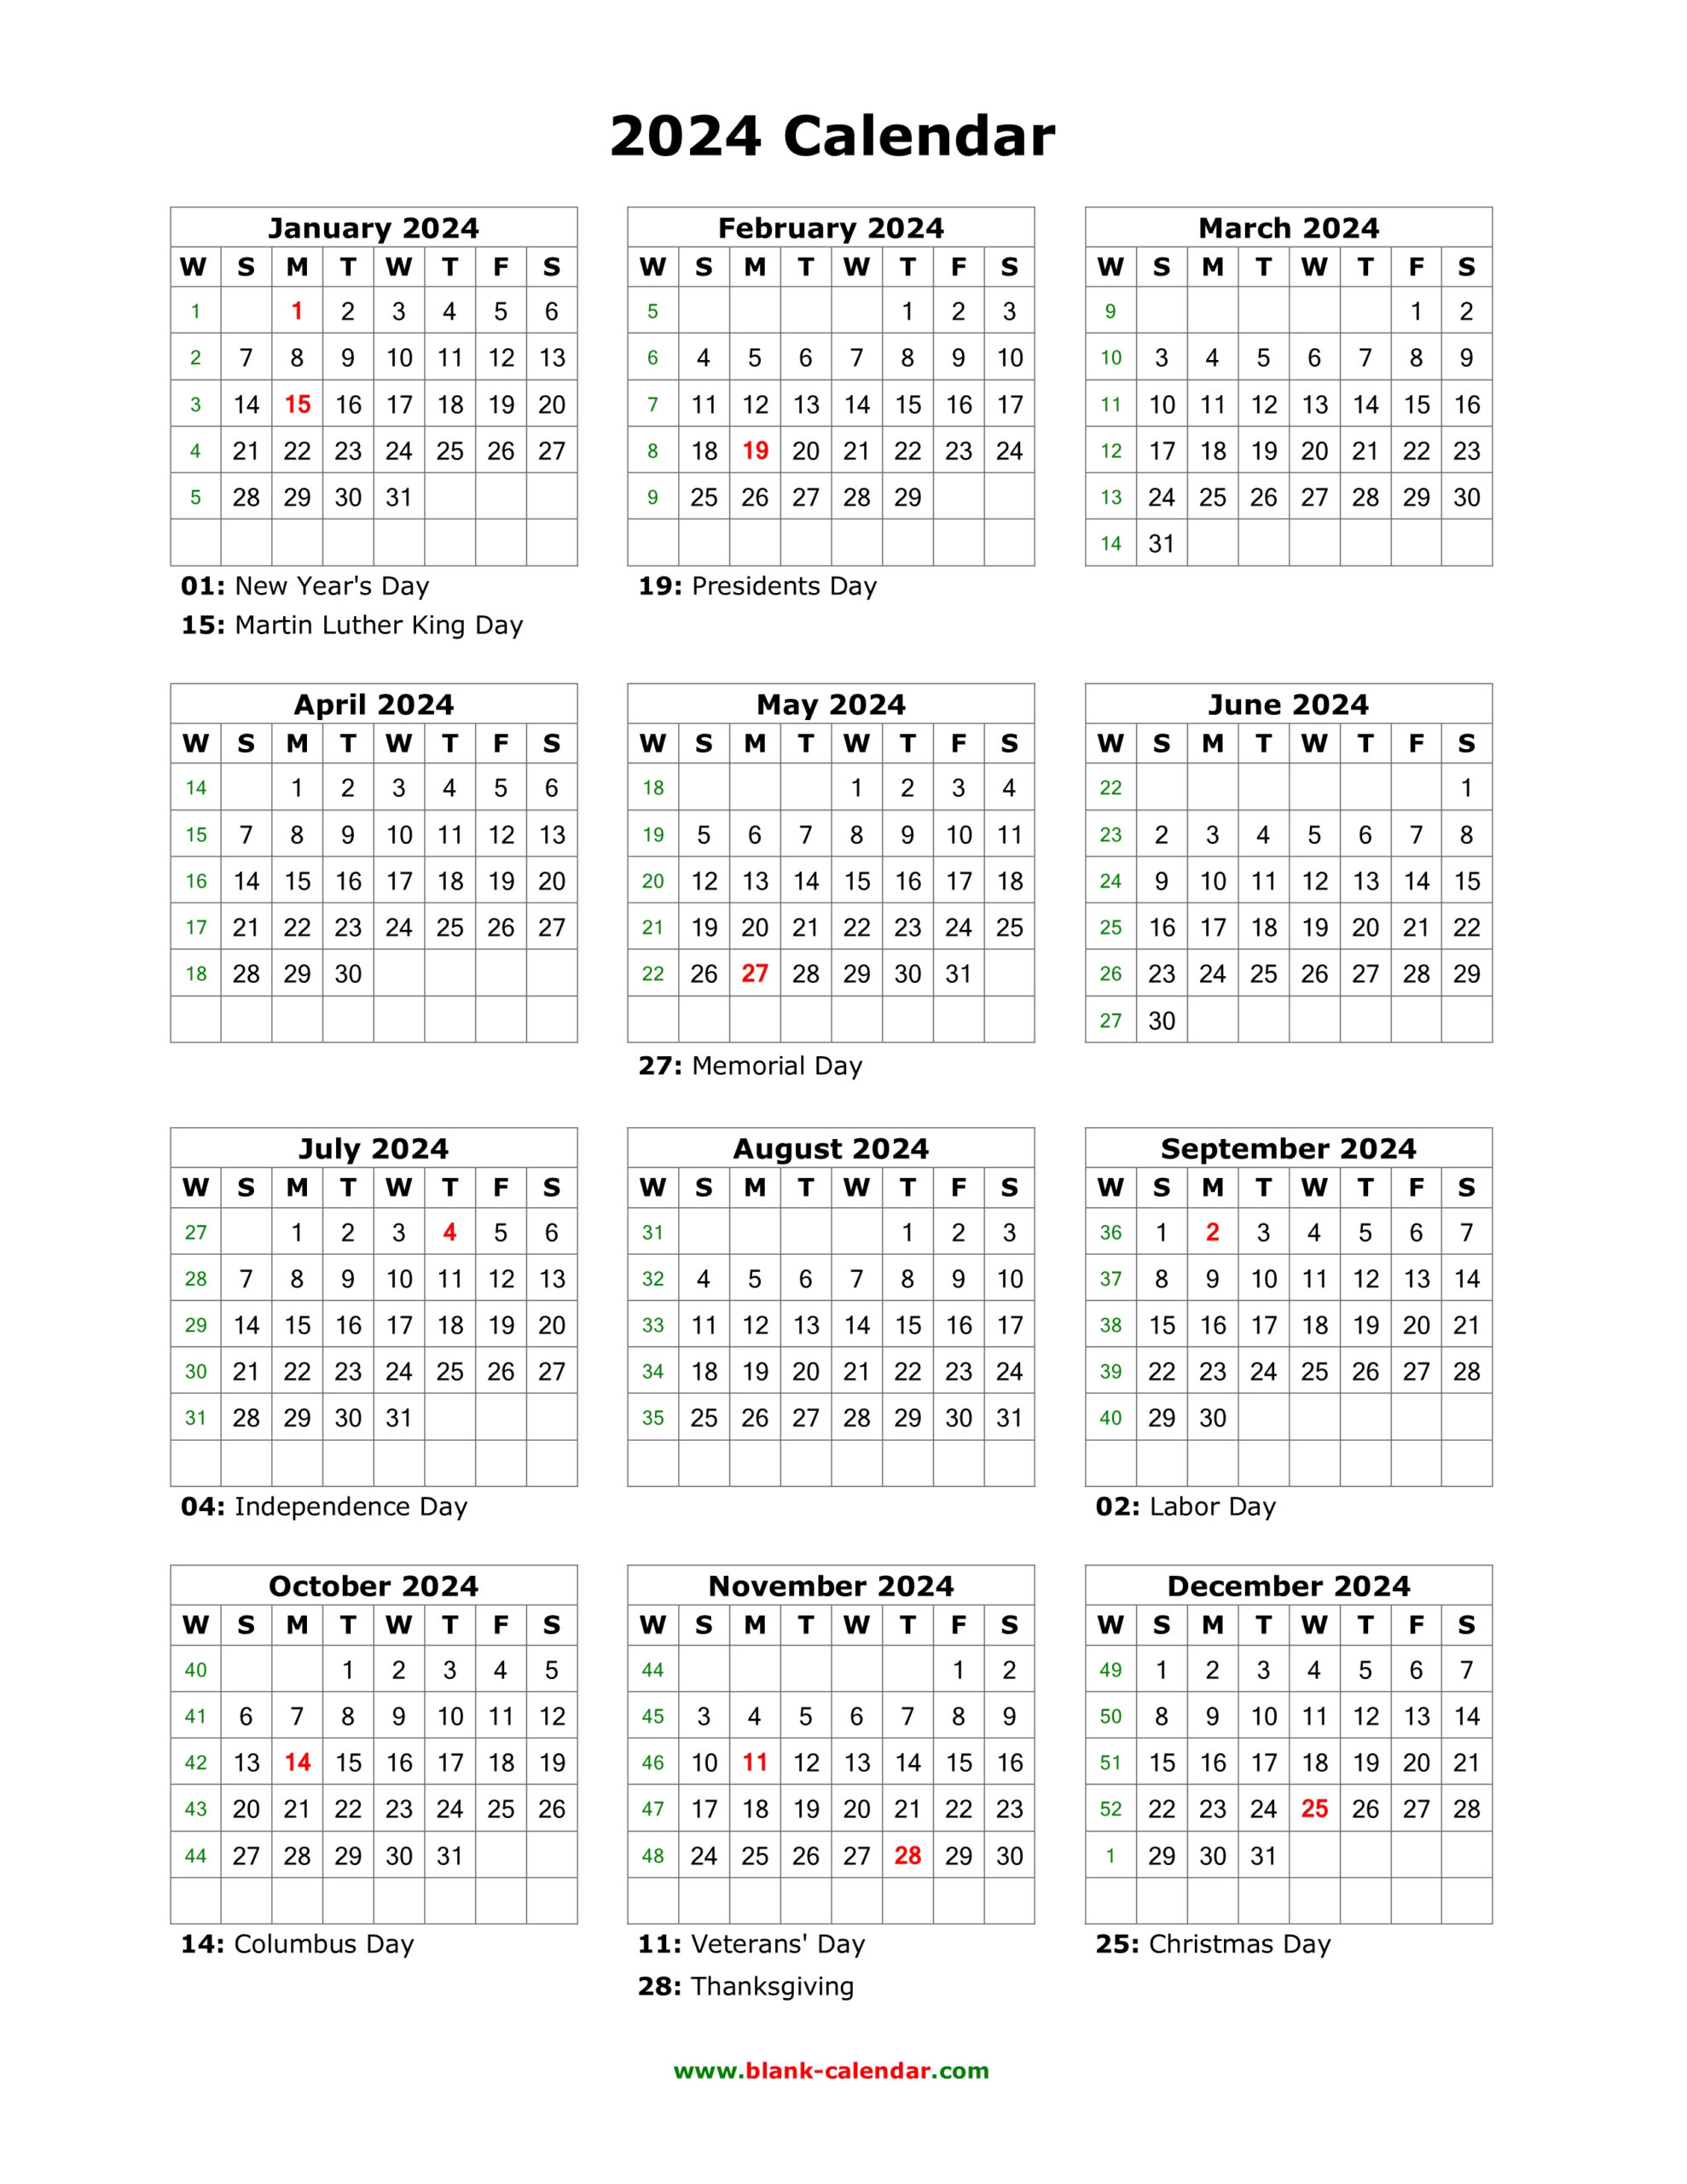 Download Blank Calendar 2024 With Us Holidays (12 Months On One for 2024 Printable Calendar With Holidays Portrait